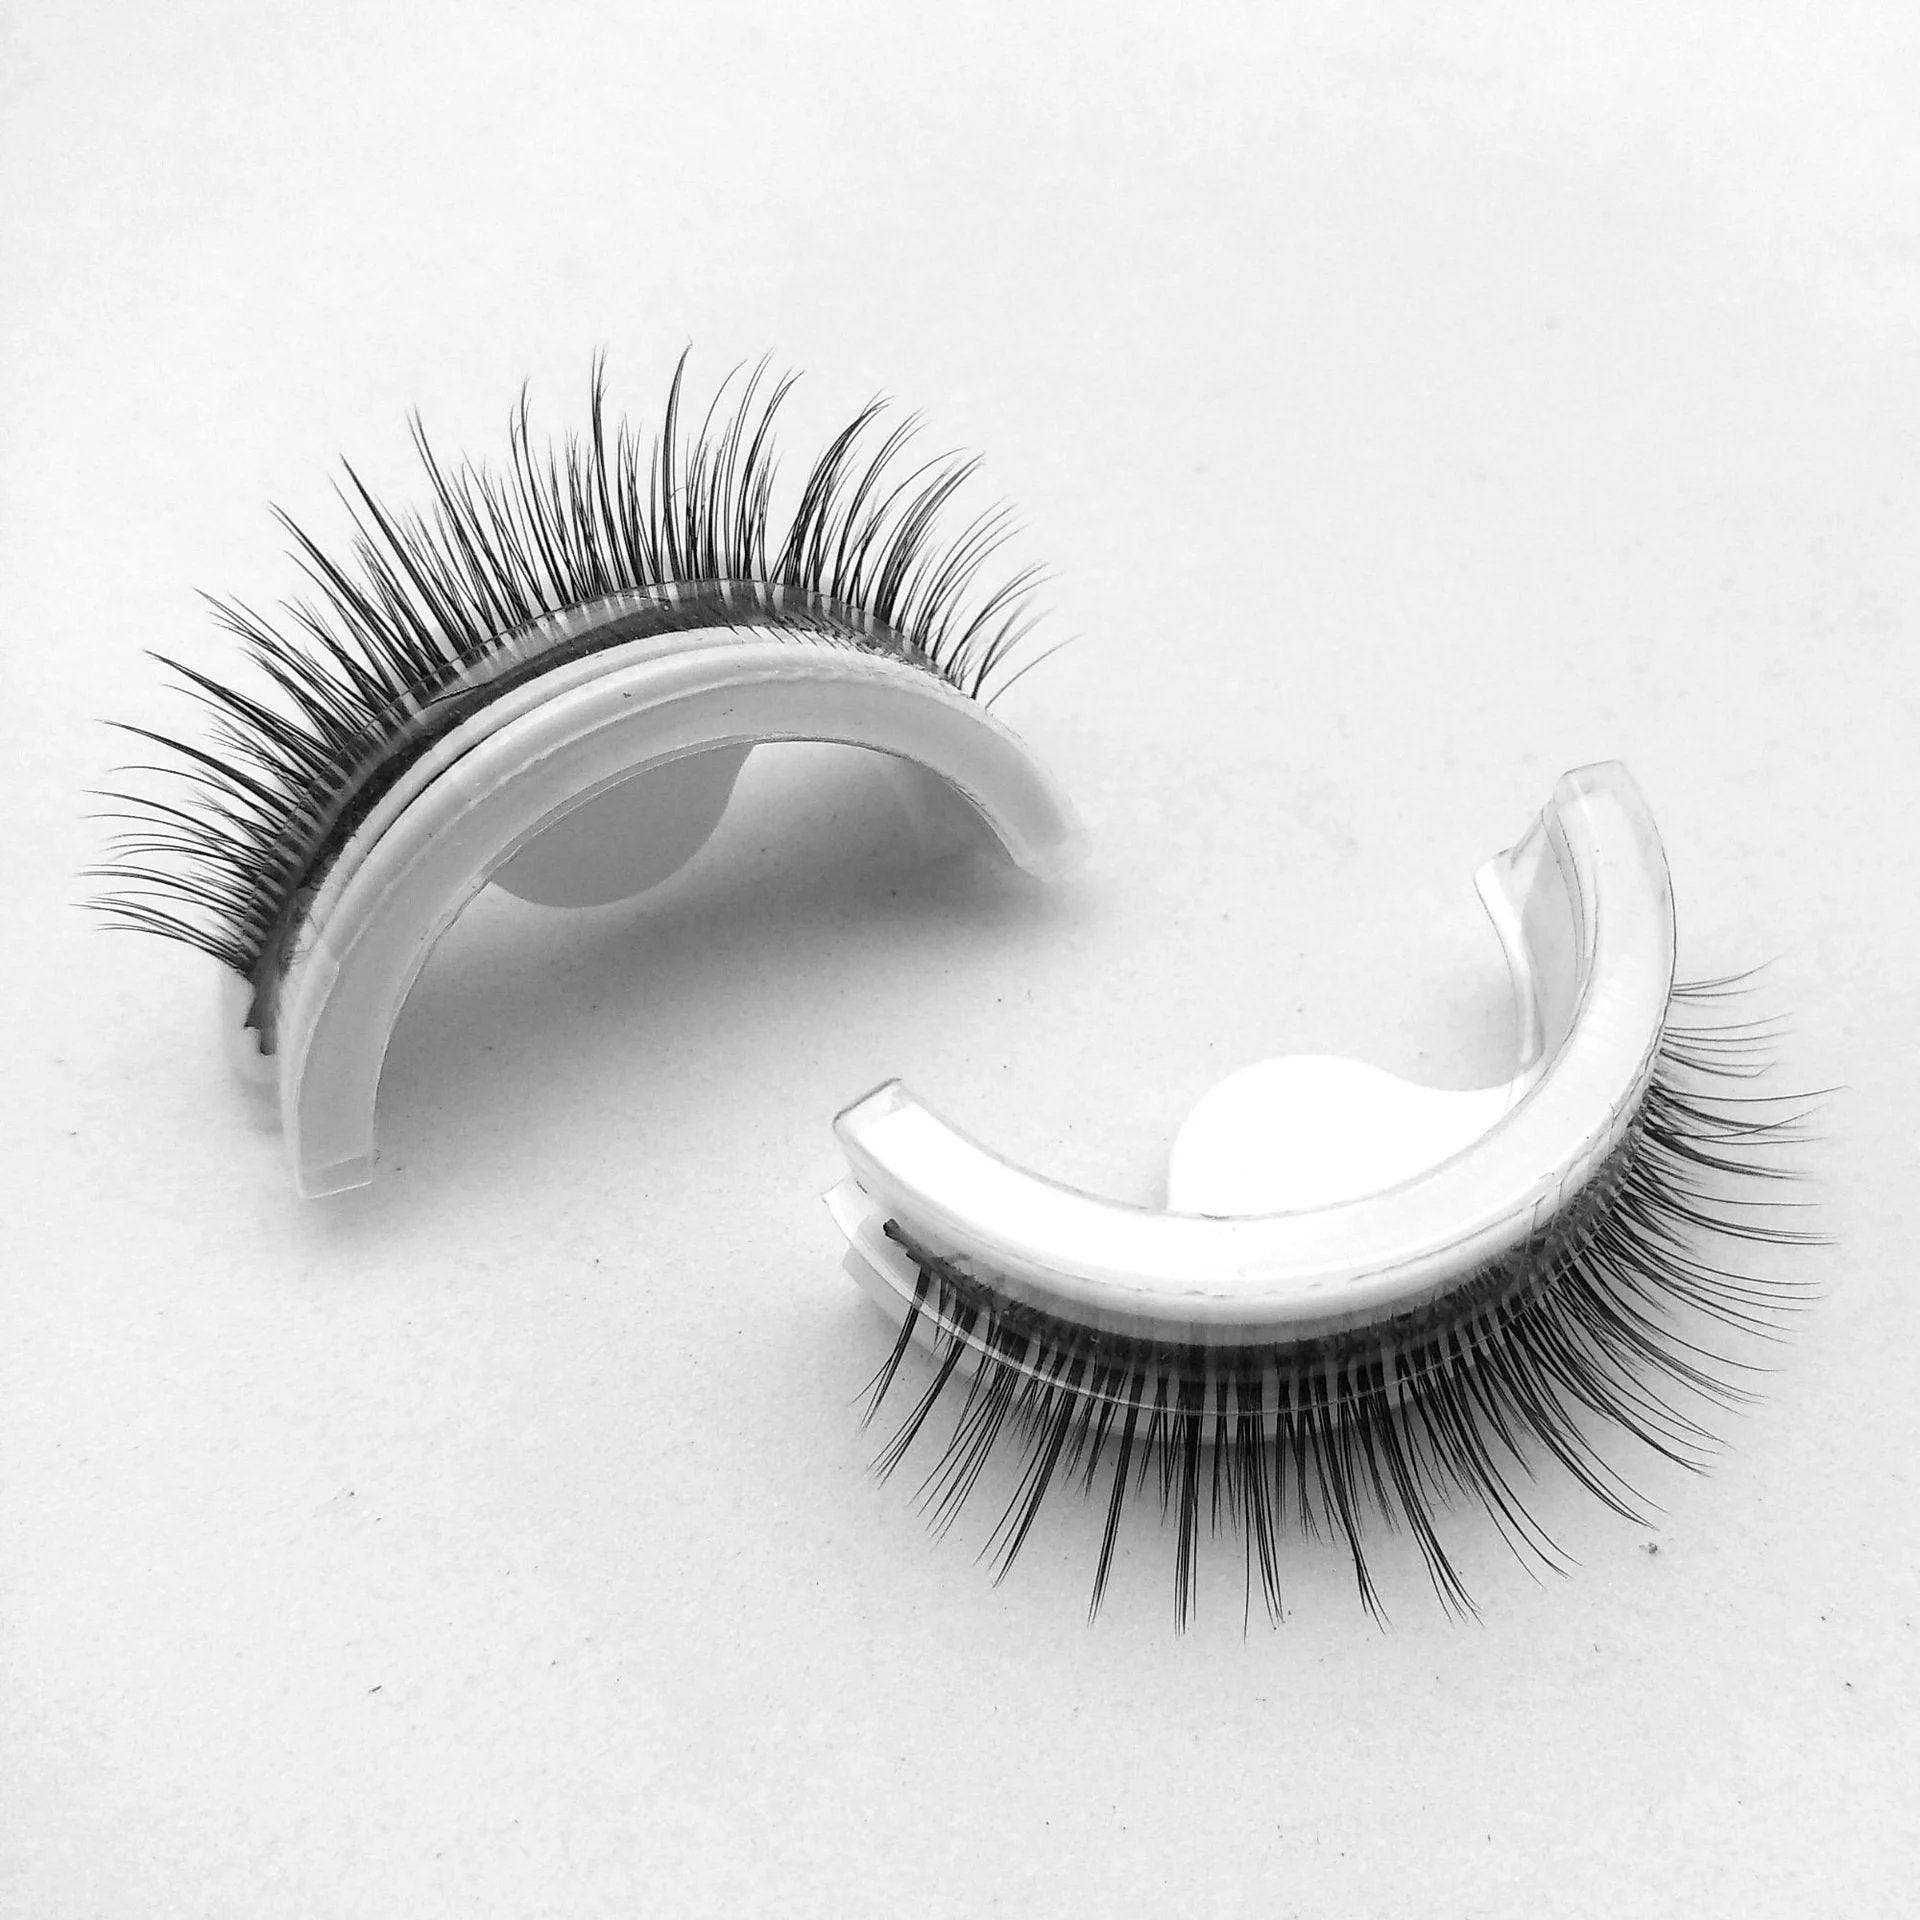 🌟Free Snap-On Lashes🌟 - dressowy